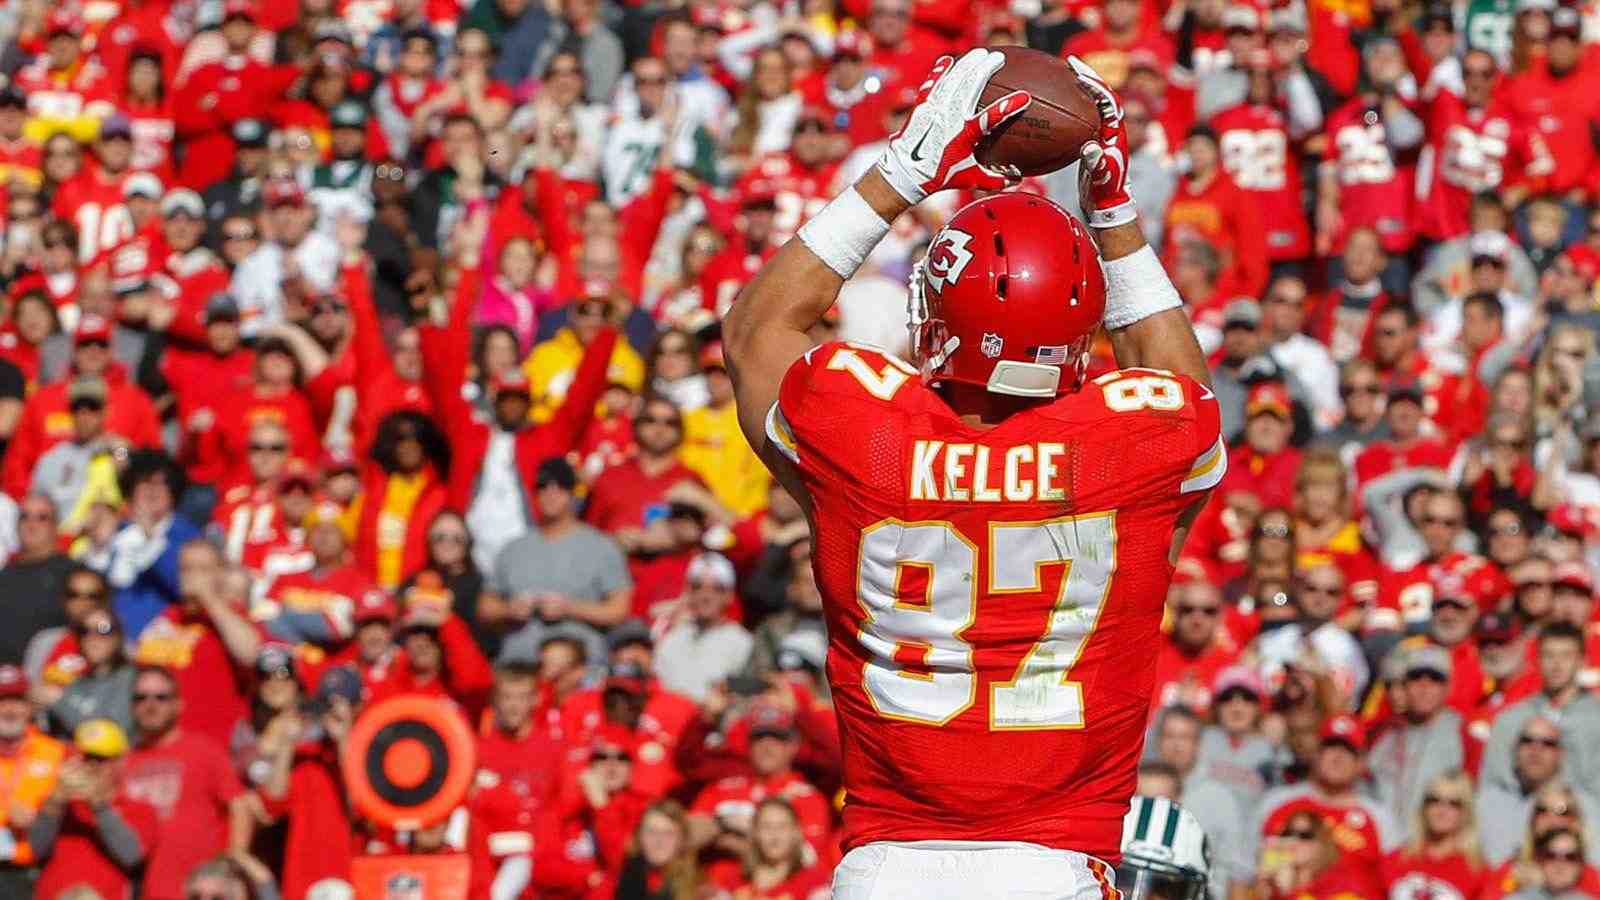 Sprint inside the Super Bowl shenanigans with Kayla Nicole & Travis Kelce! Uncover their sideline spectacle, love league ranking, and continuing journey. Click, cheer, and cherish their story!